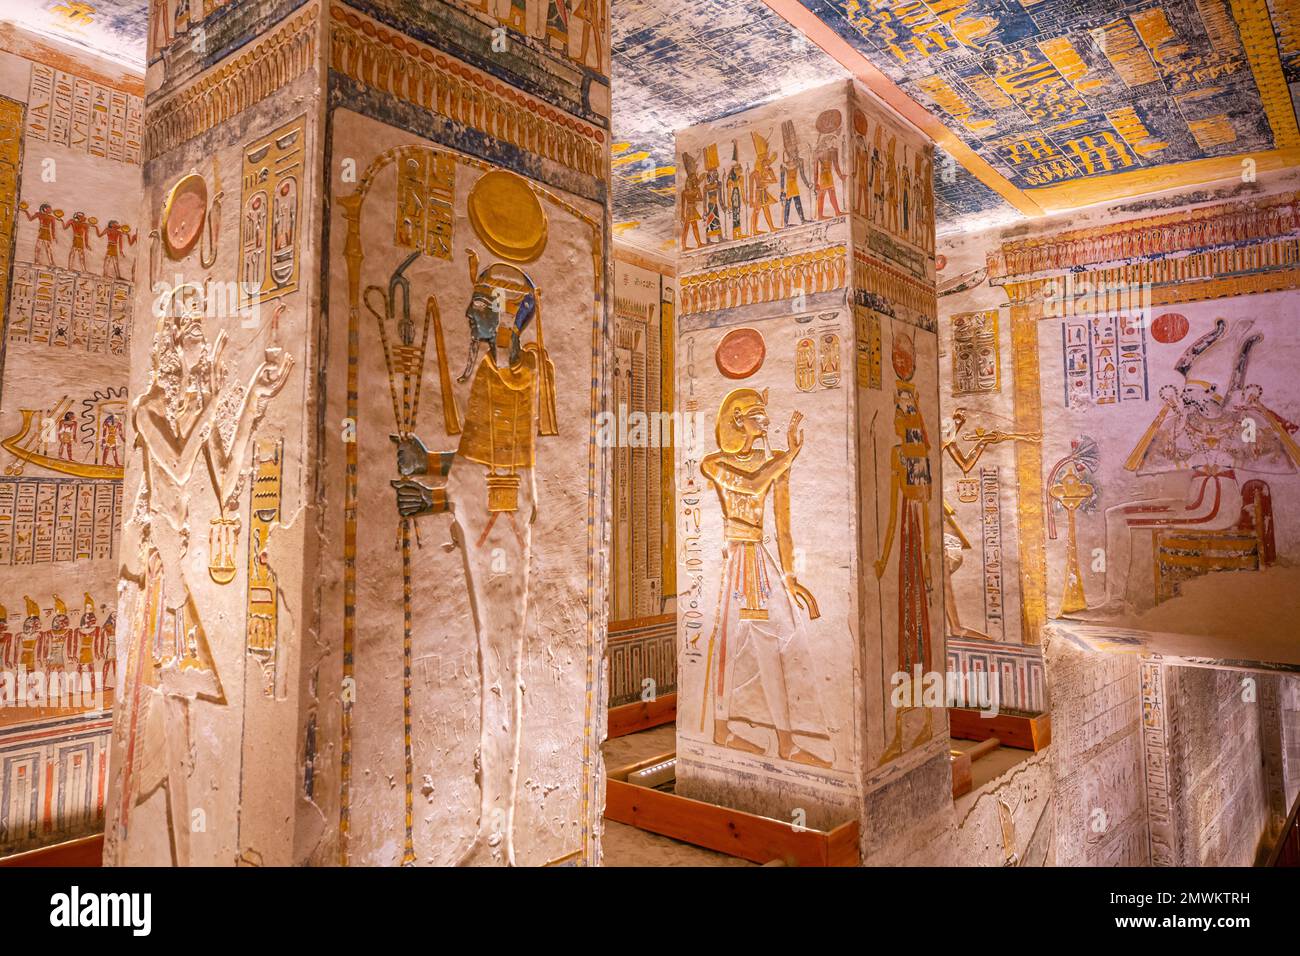 Ramesses VI tomb at Valley of the Kings, Luxor, Egypt Stock Photo